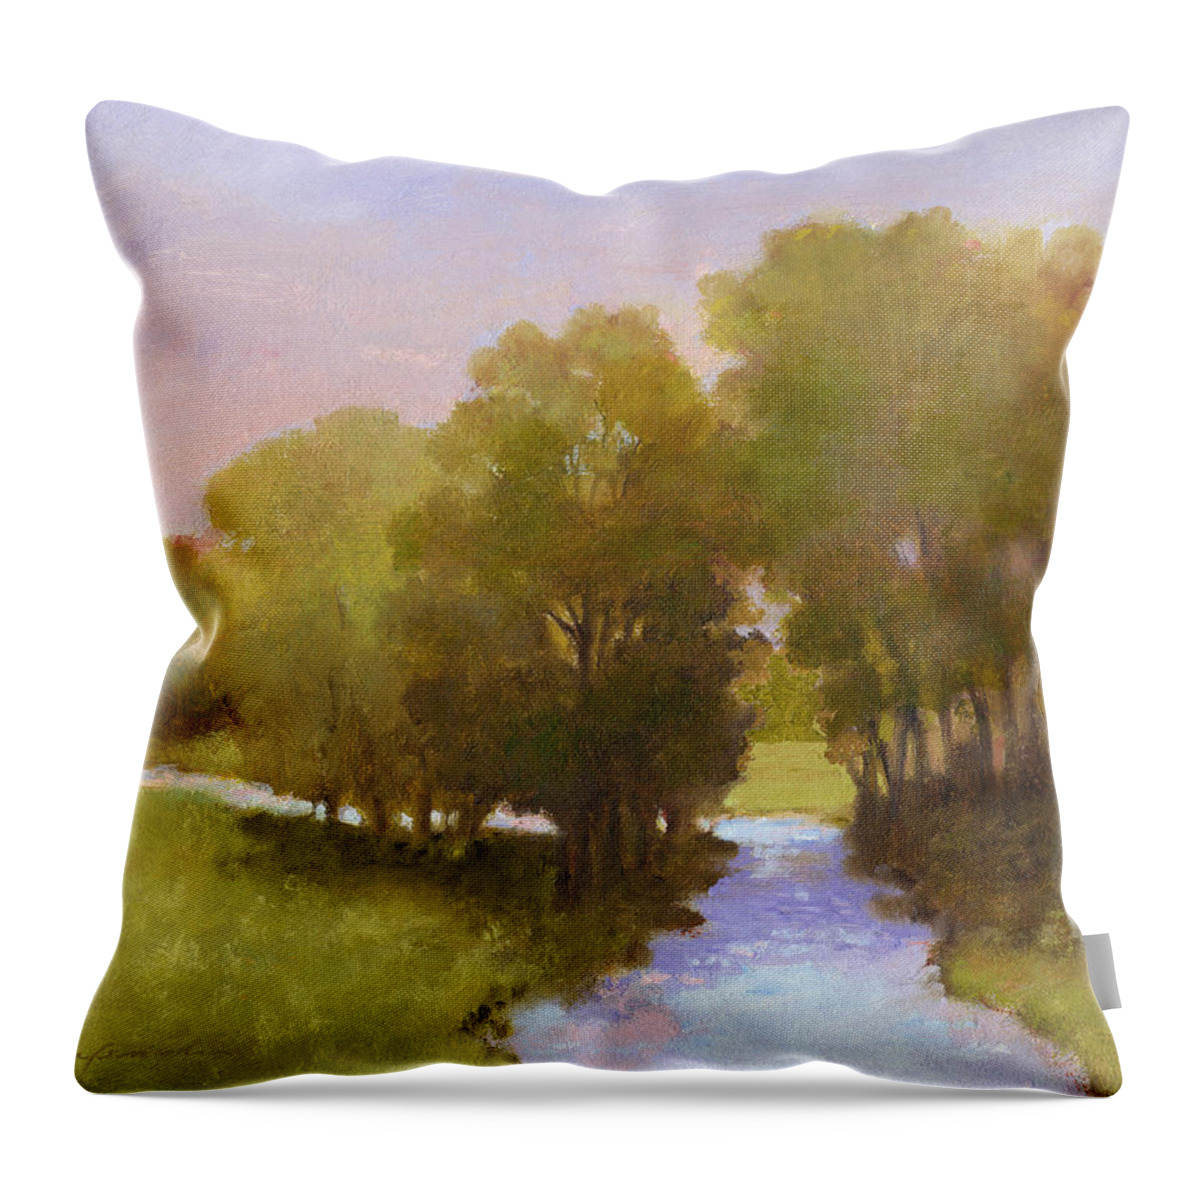 River Throw Pillow featuring the painting Shady Run by J Reifsnyder